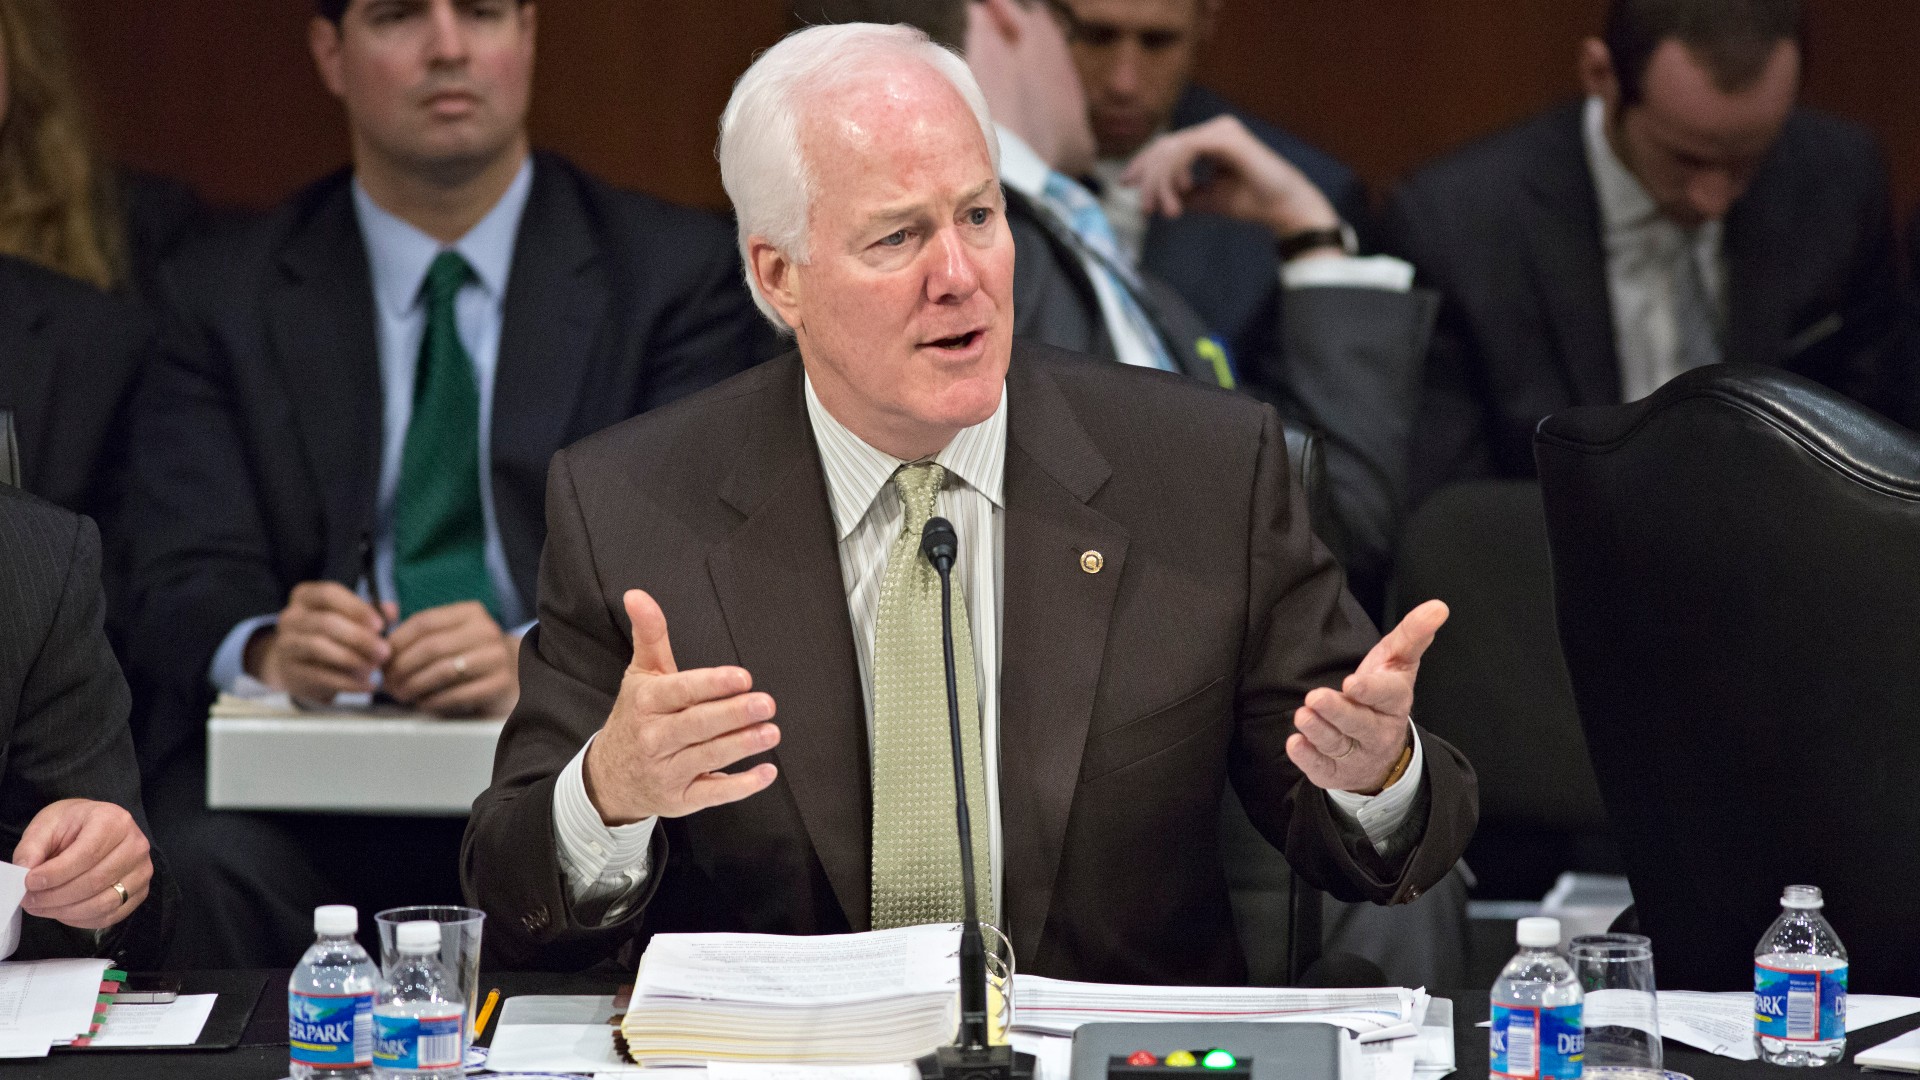 Sen. John Cornyn, R-Texas, discusses an amendment as the Senate Judiciary Committee meets in a markup session to examine proposed changes to immigration reform legislation, on Capitol Hill in Washington, Thursday, May 9, 2013. (AP Photo/J. Scott Applewhite)